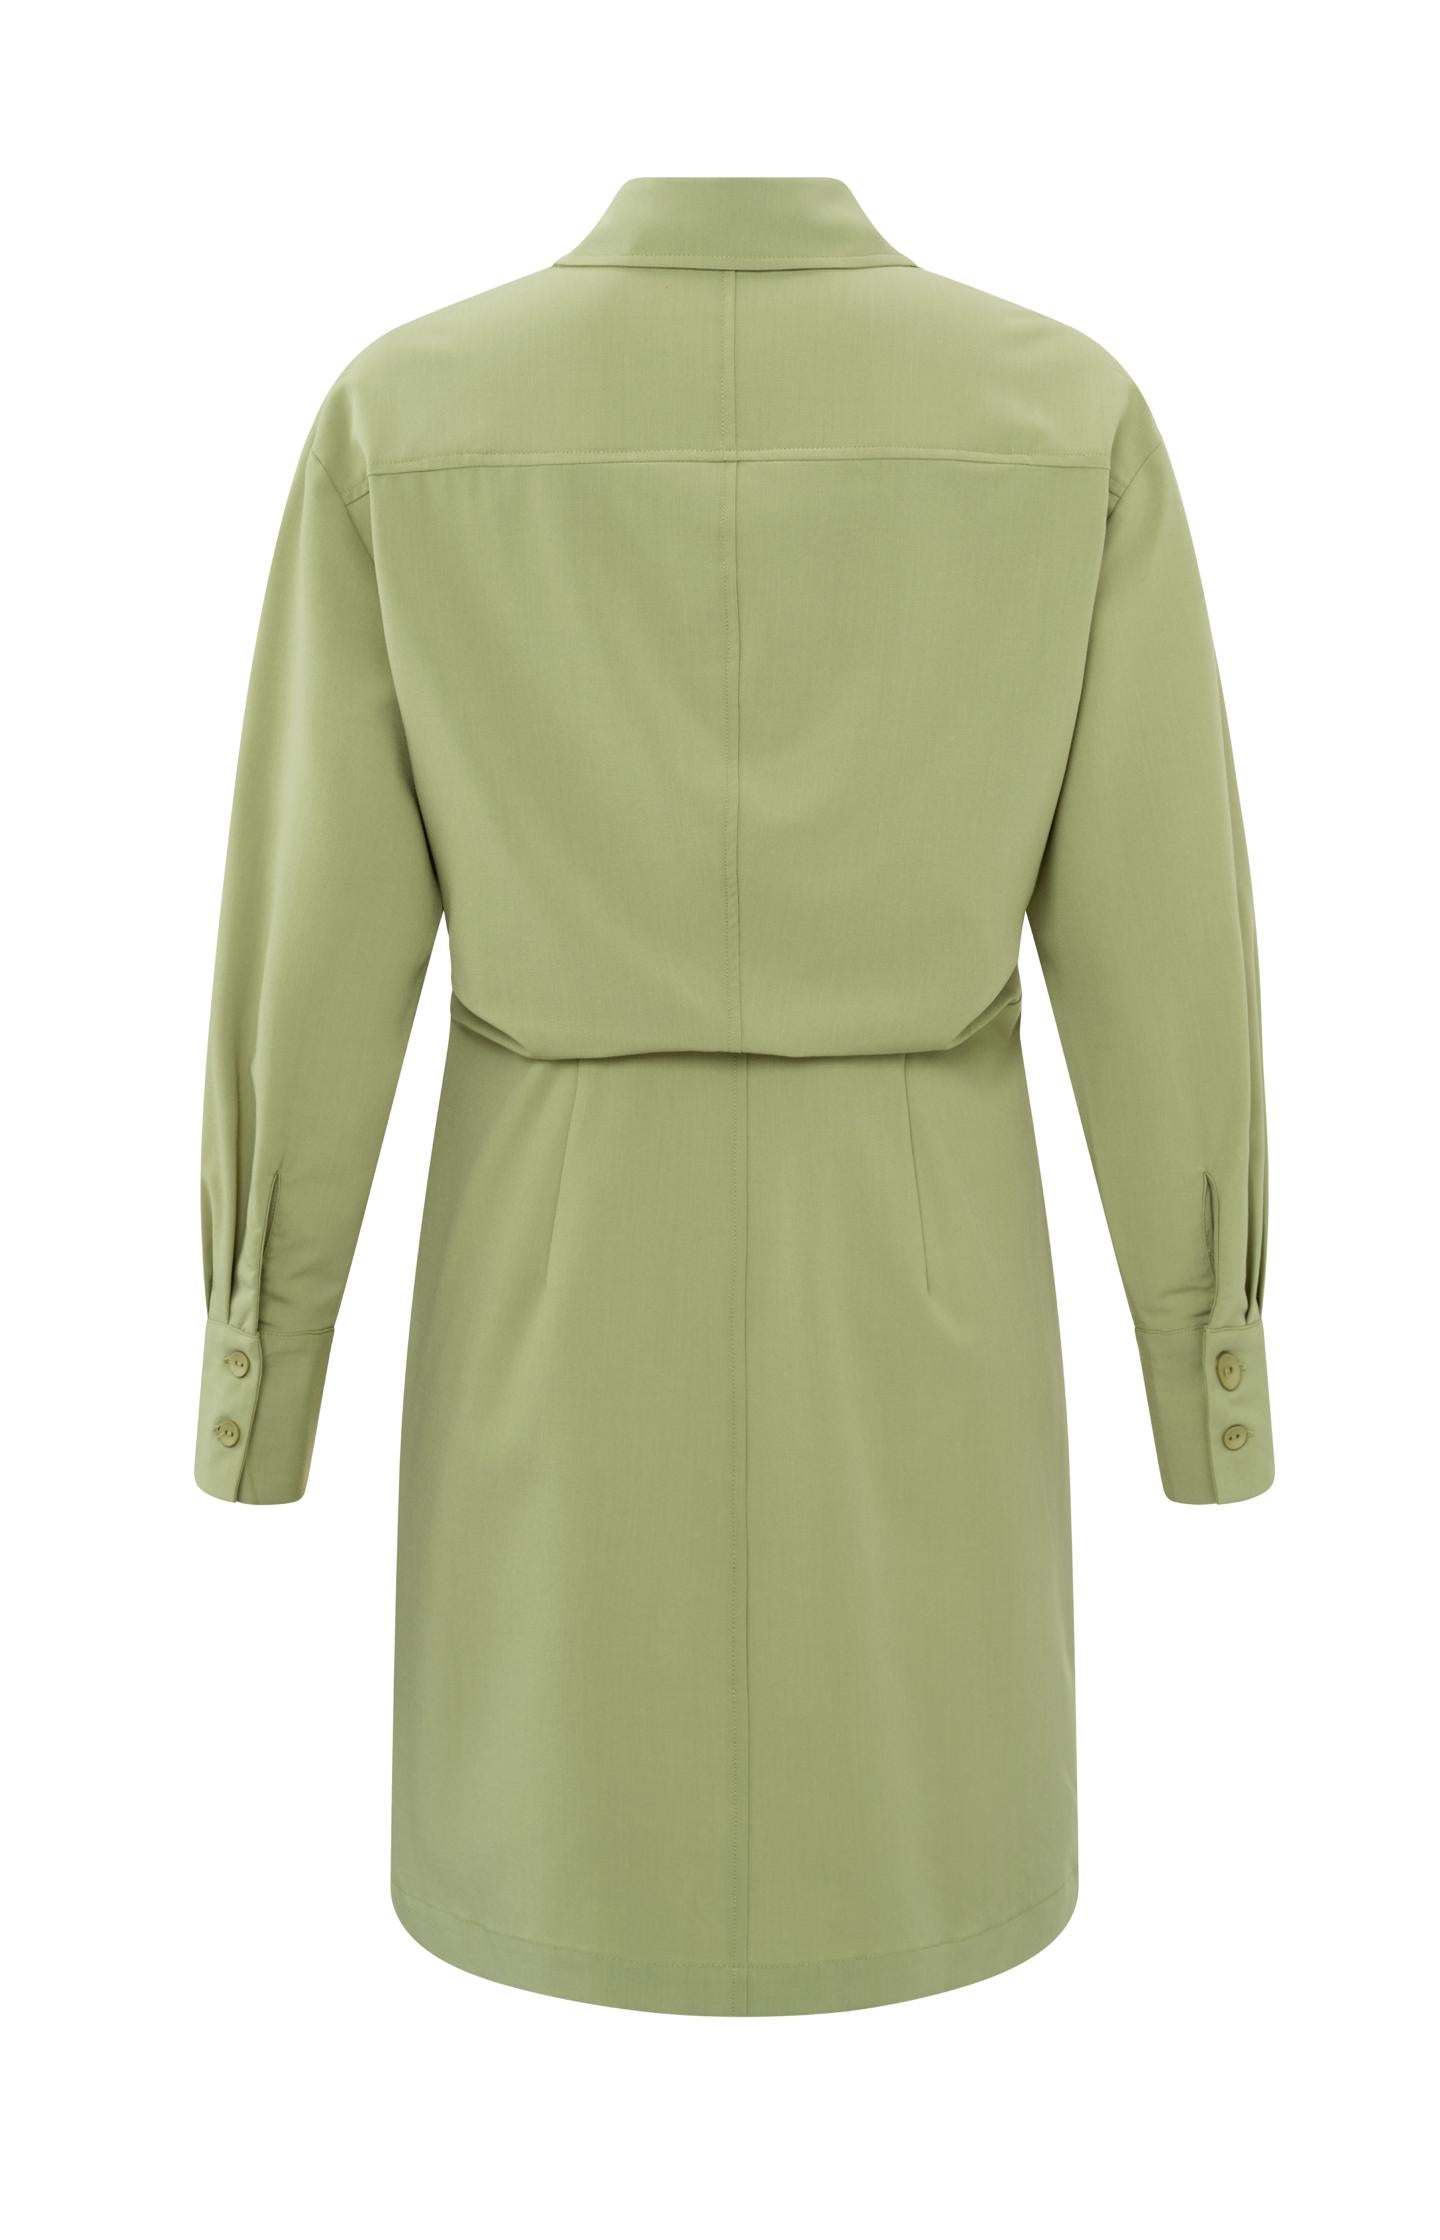 Fitted blouse dress with collar, long sleeves and buttons - Type: product